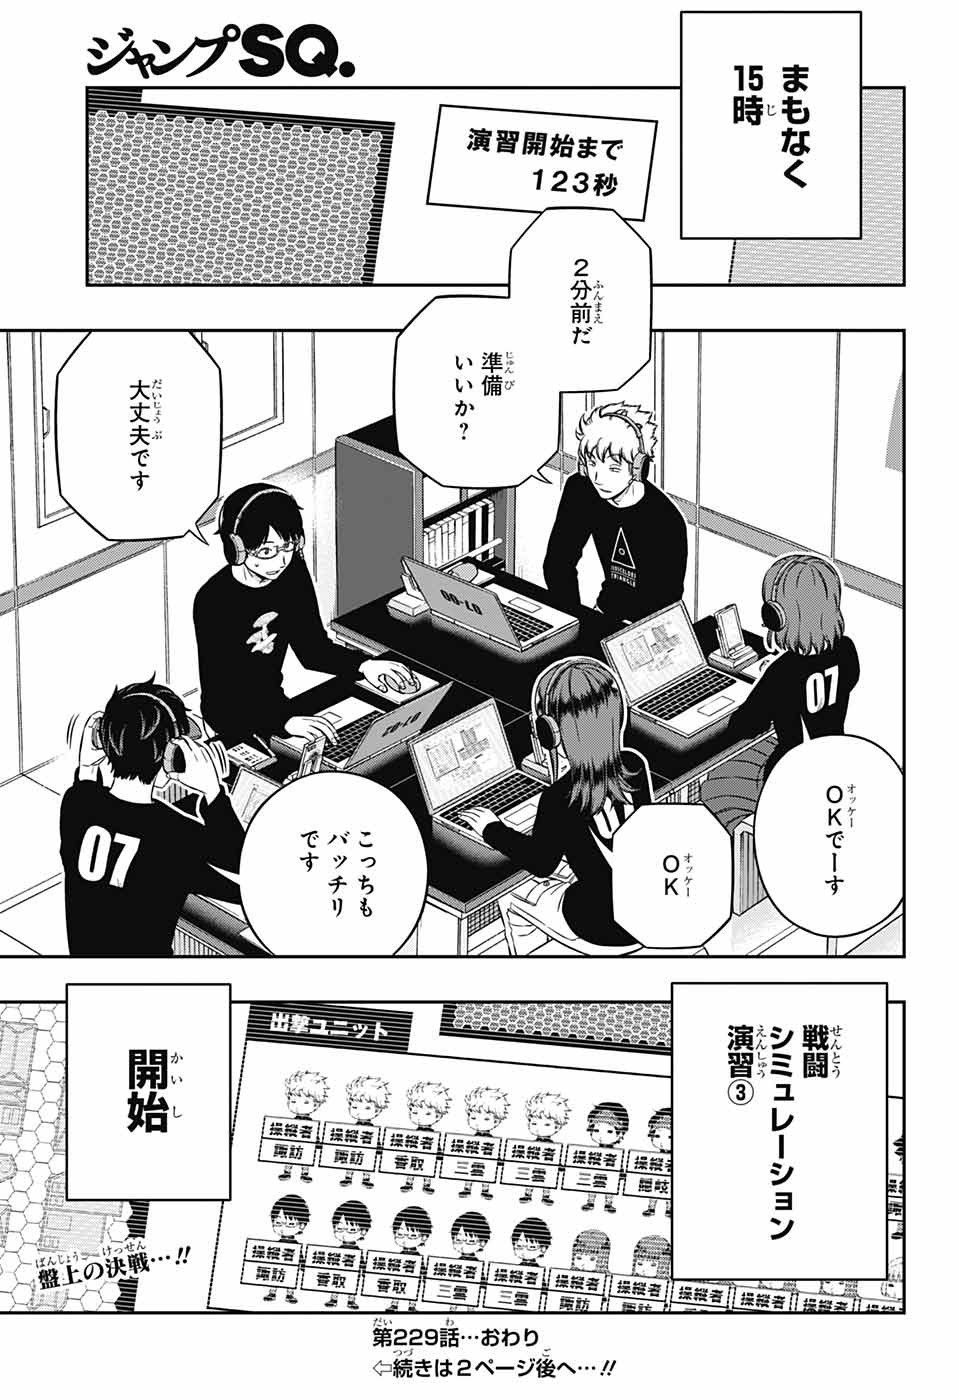 World Trigger - Chapter 229 - Page 21